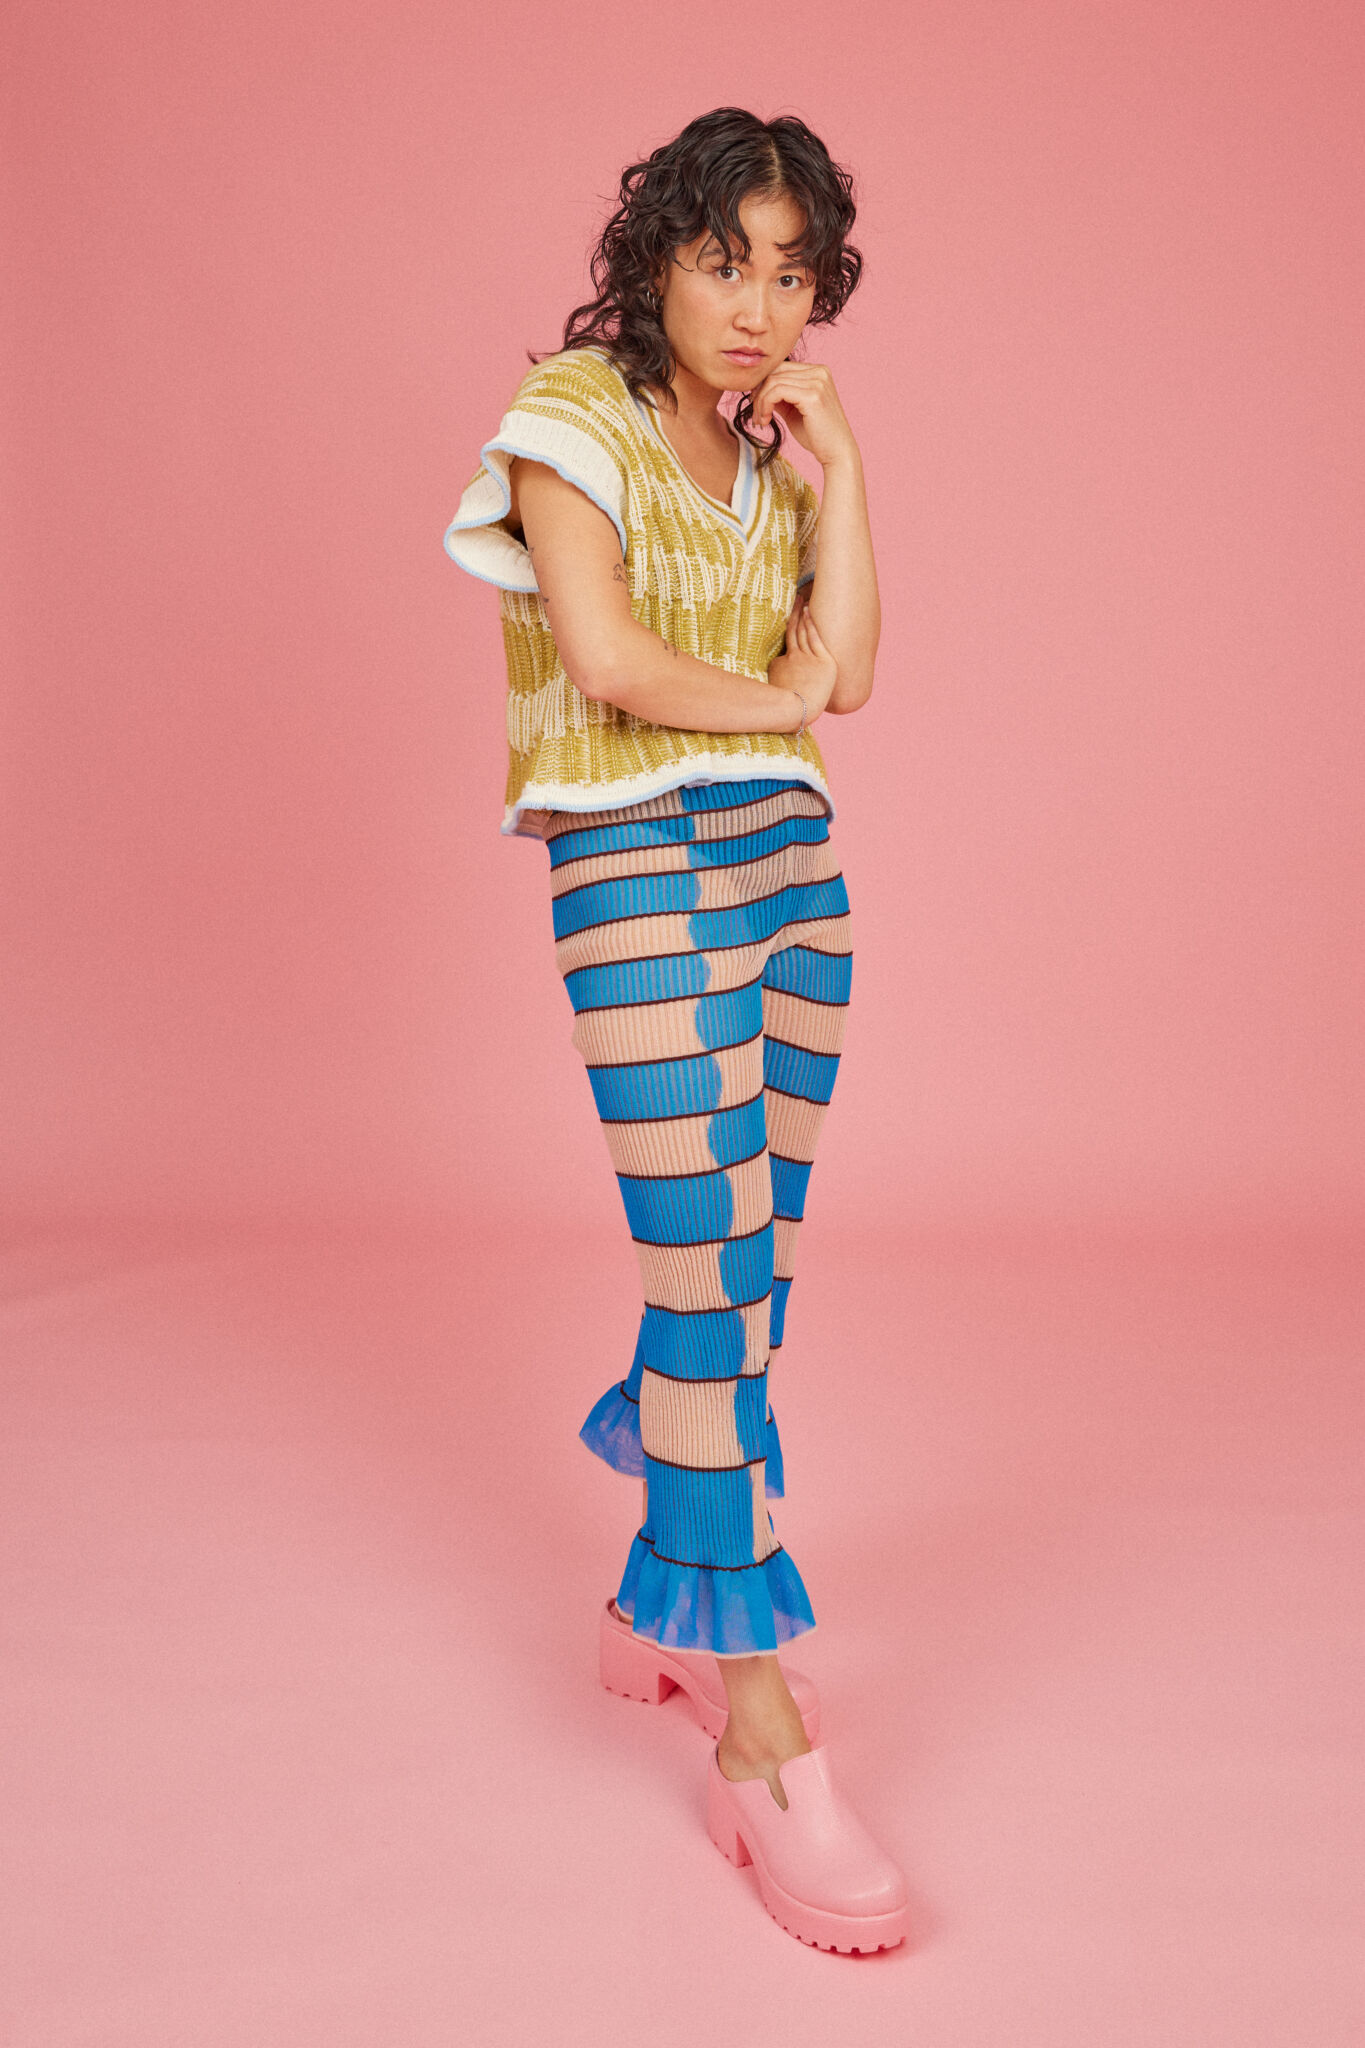 Loveable Loop shot by Amelia Lourie. Wavy Chess Vest and Twisted Secret Trouser.